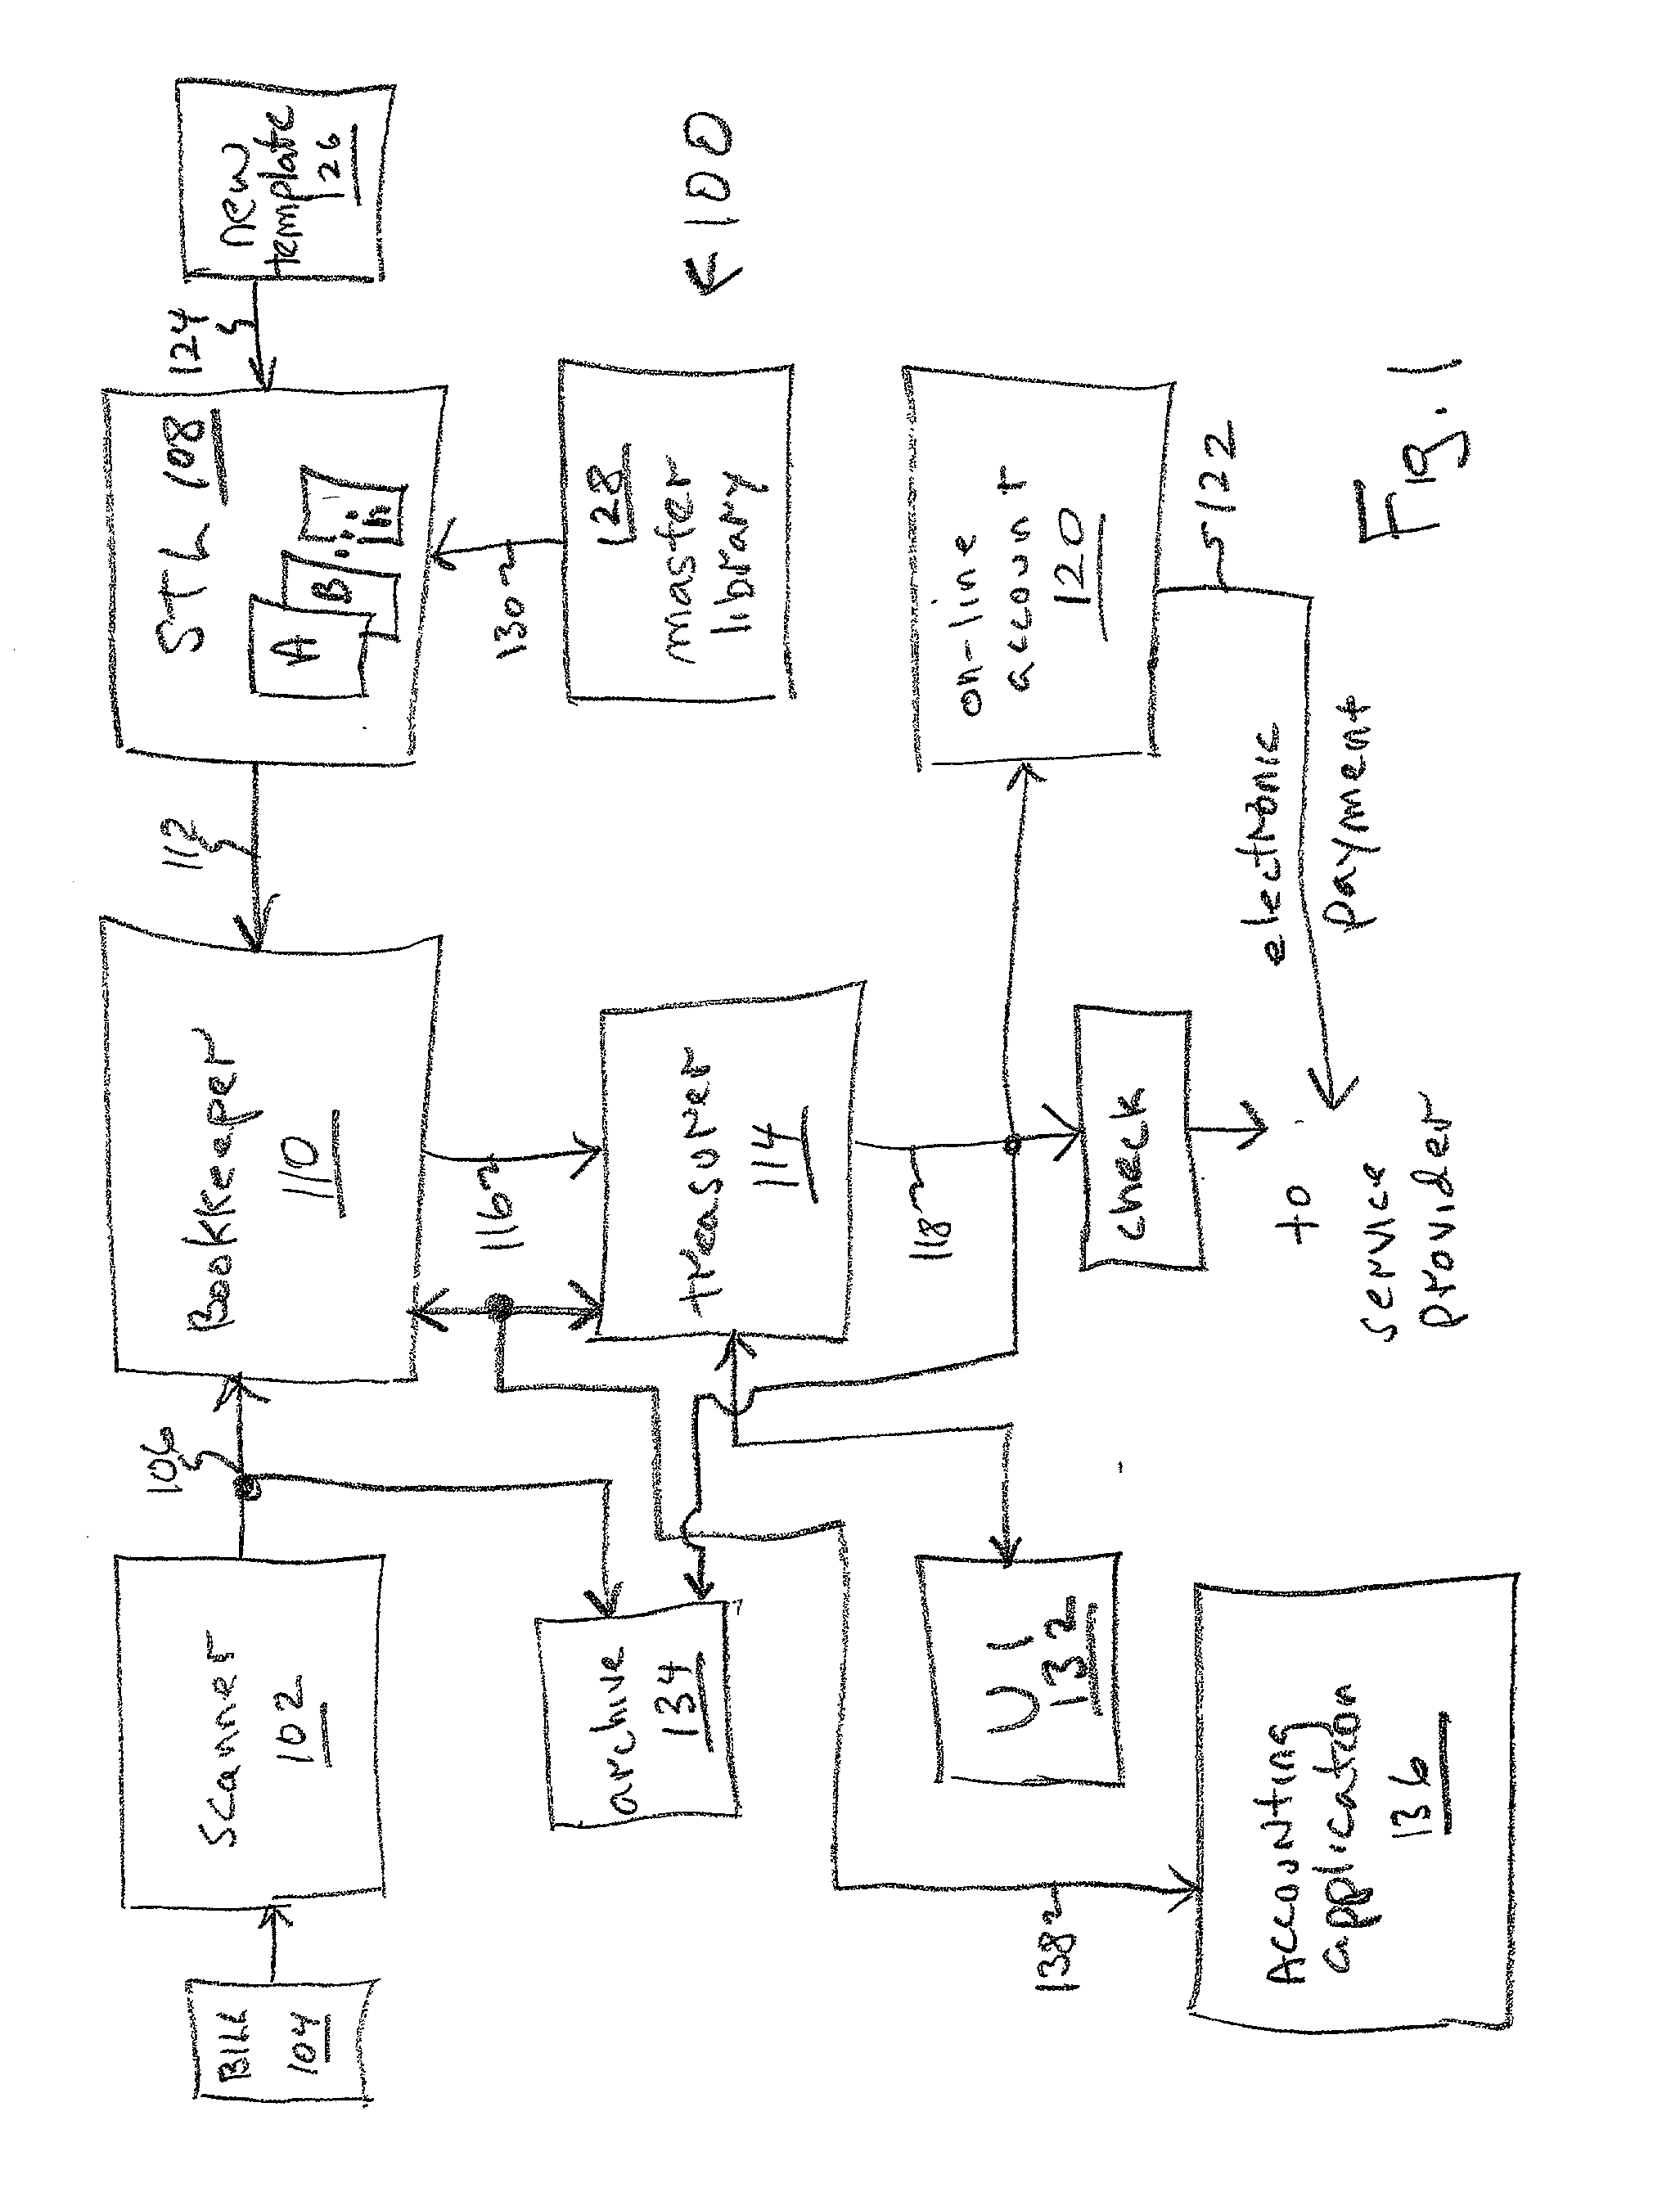 System and method for automatic bill payment